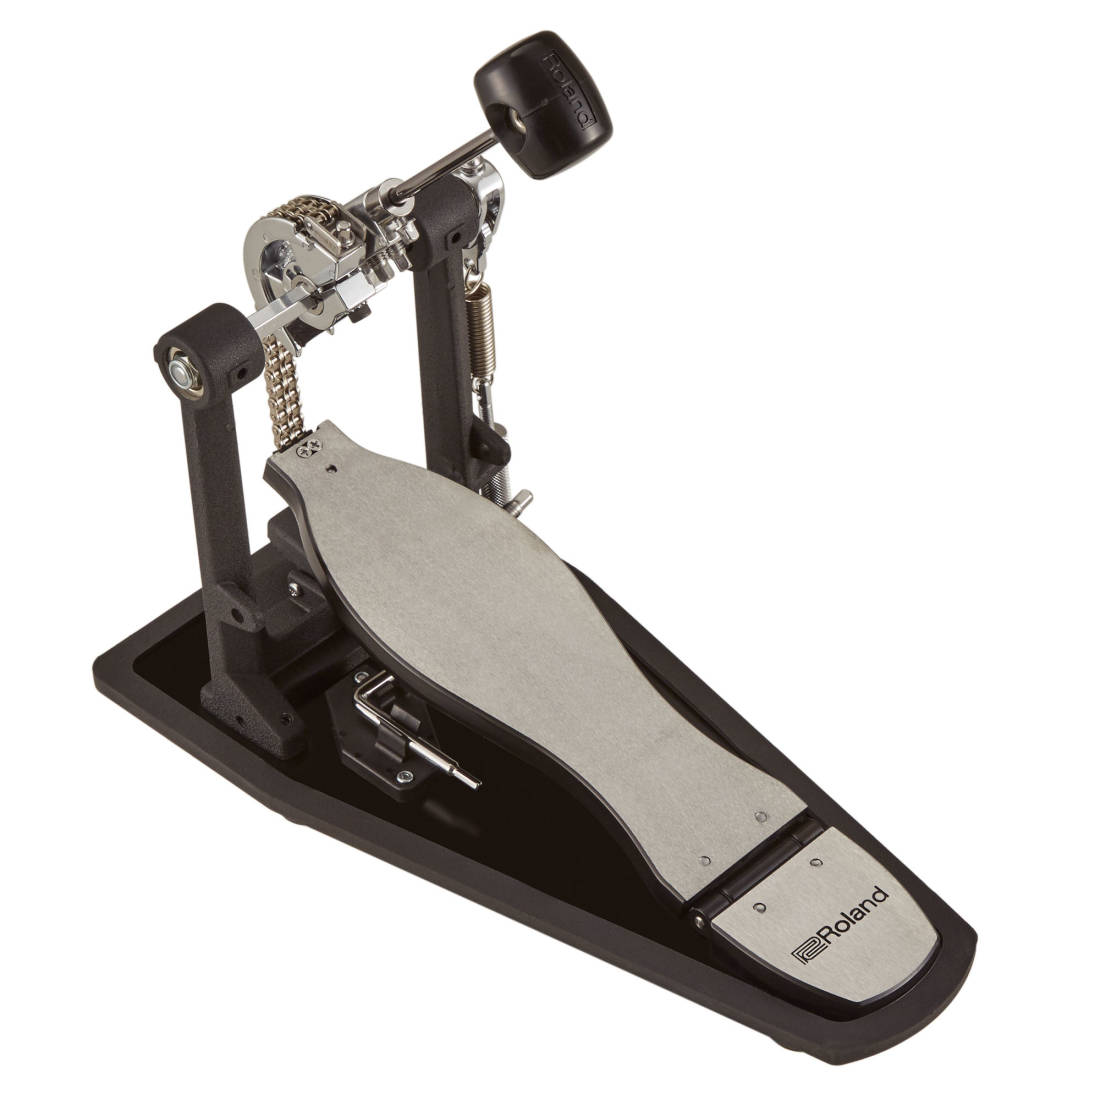 RDH-100A Heavy-Duty Kick Pedal with Low Acoustic Noise